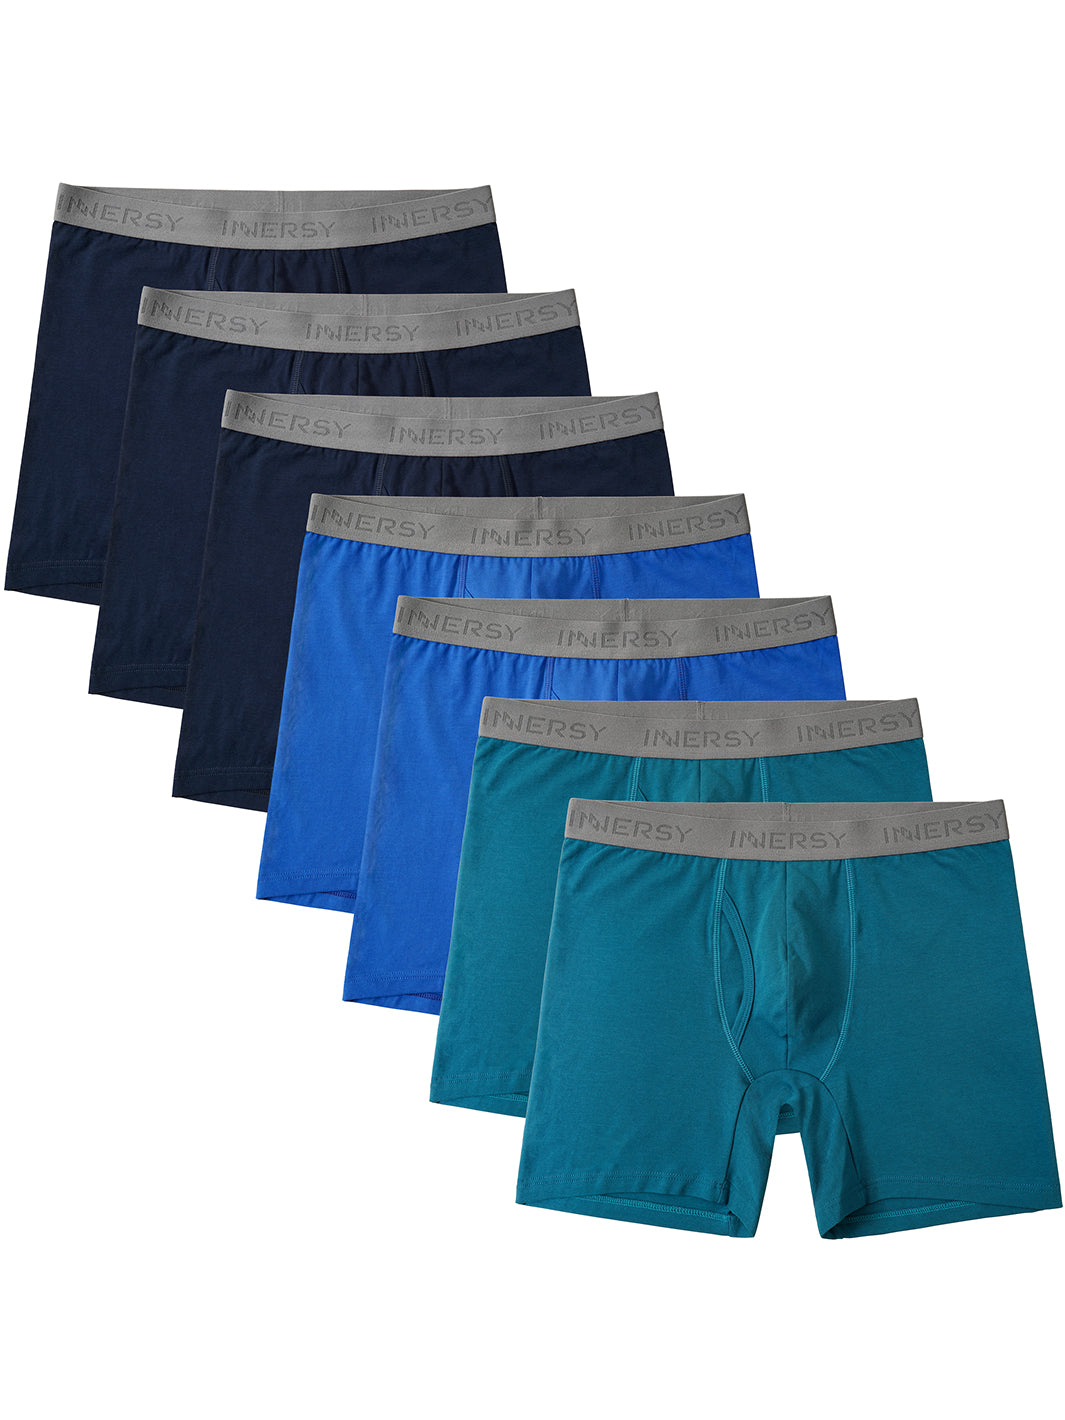 New Mens 3 Pack Fruit of the Loom classic slip BRIEFS Underwear